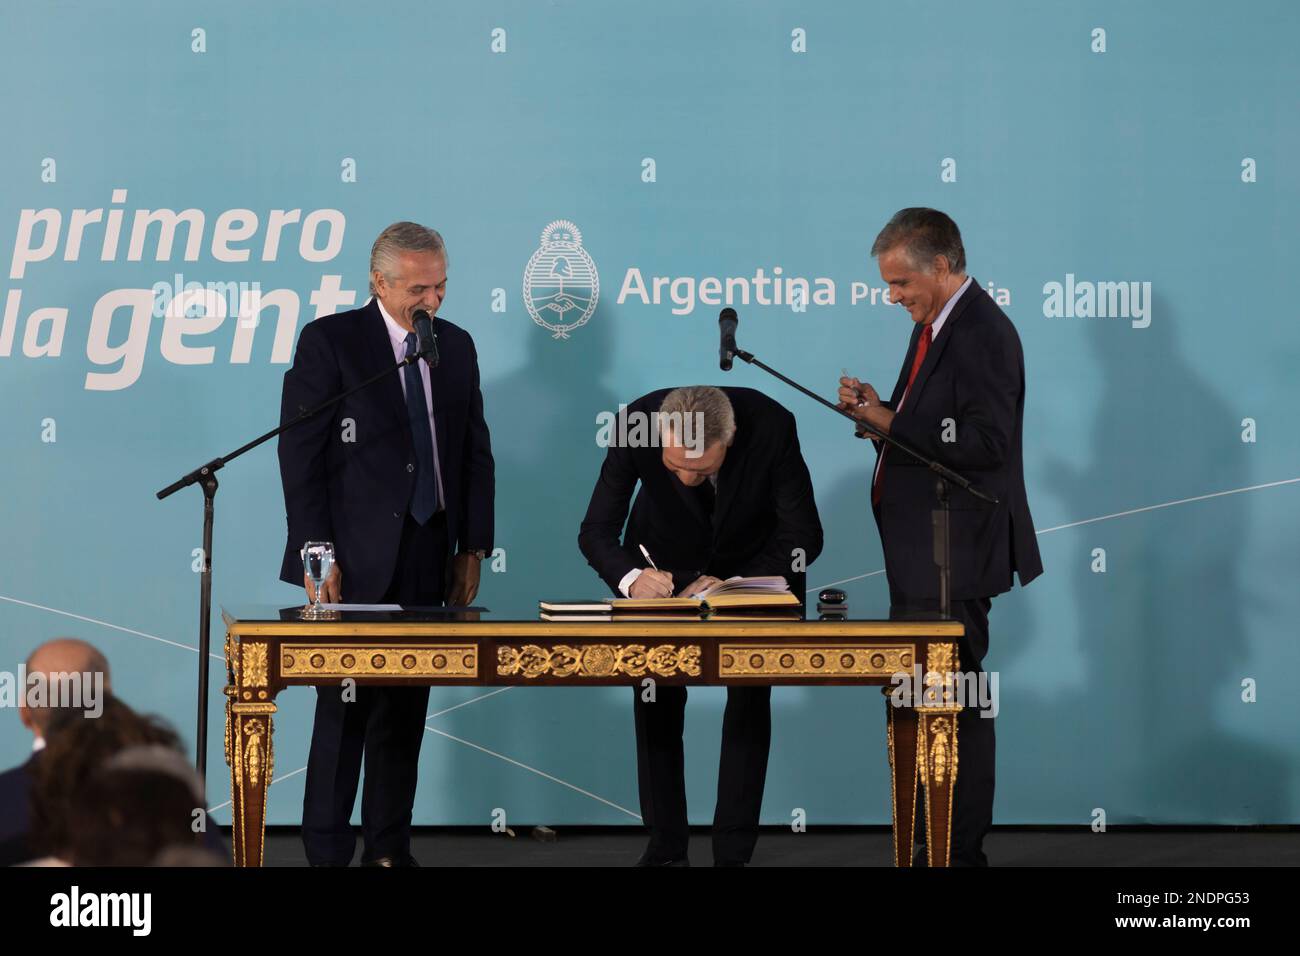 Buenos Aires, Argentina. 15th Feb, 2023. The President of the Nation Alberto Fernandez swore in the new Chief of Ministers of the Nation Agustín Rossi at the Government House. (Photo by Esteban Osorio/Pacific Press) Credit: Pacific Press Media Production Corp./Alamy Live News Stock Photo